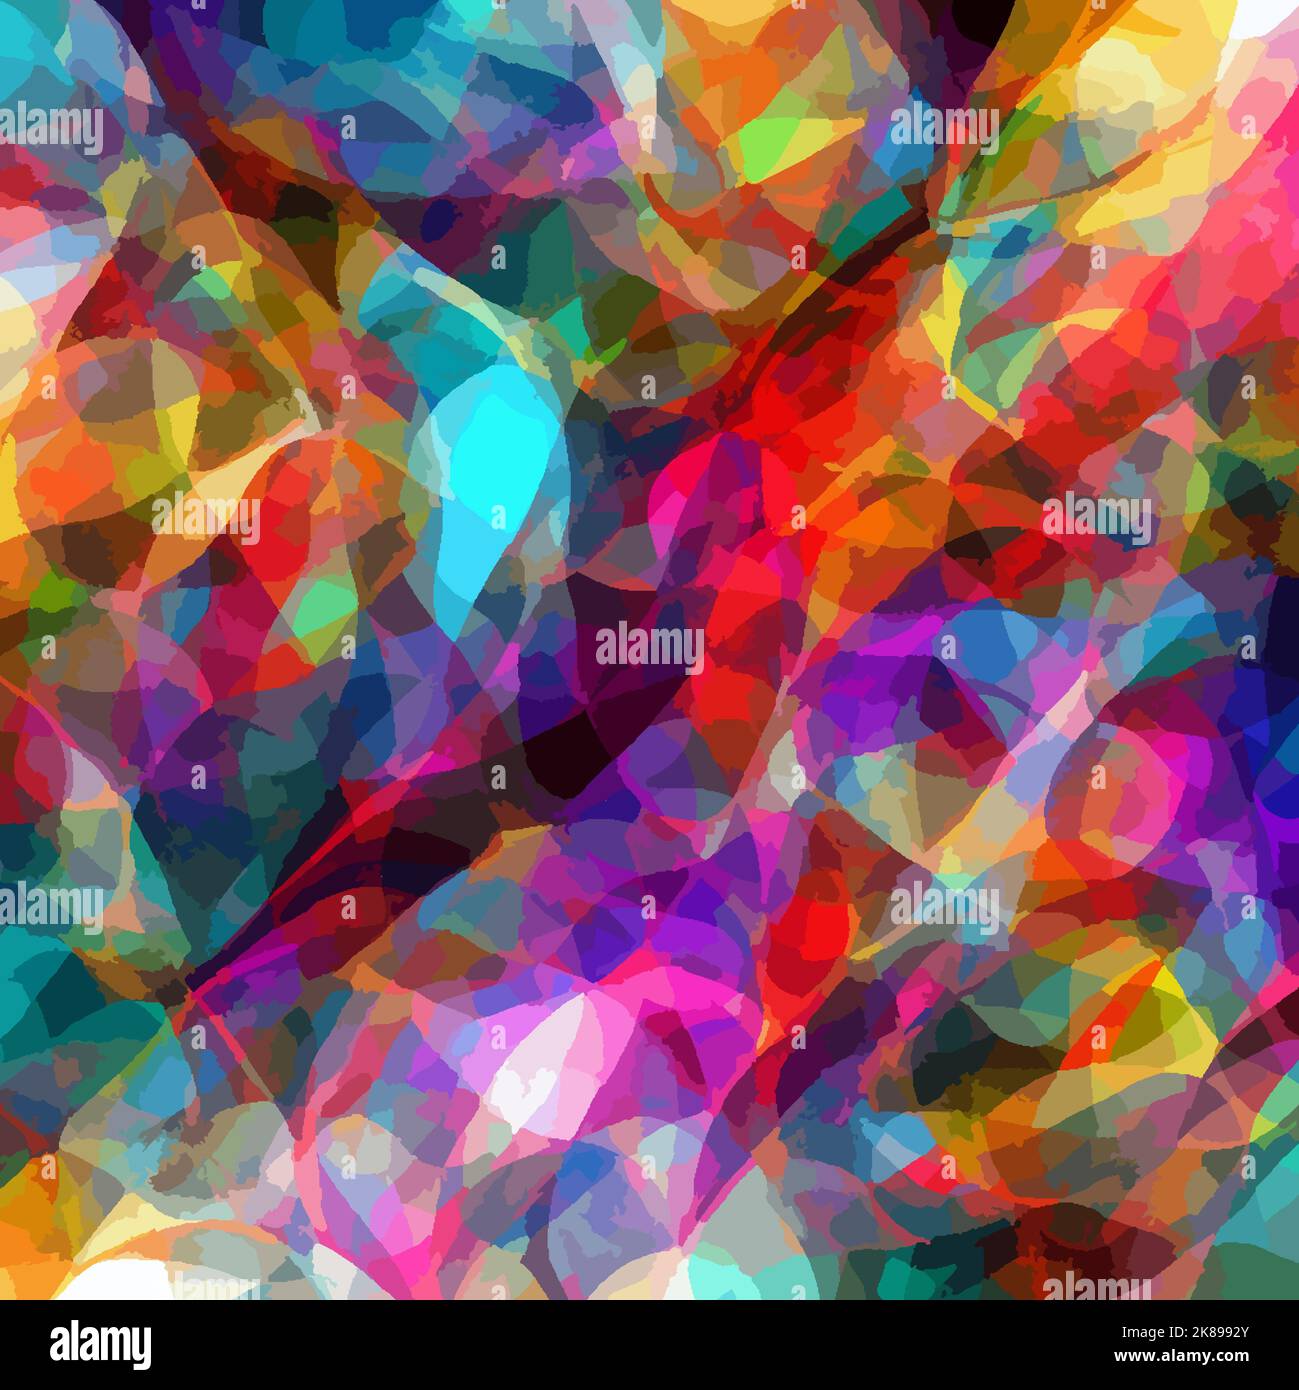 Artistic psychedelic colors pattern background Stock Photo